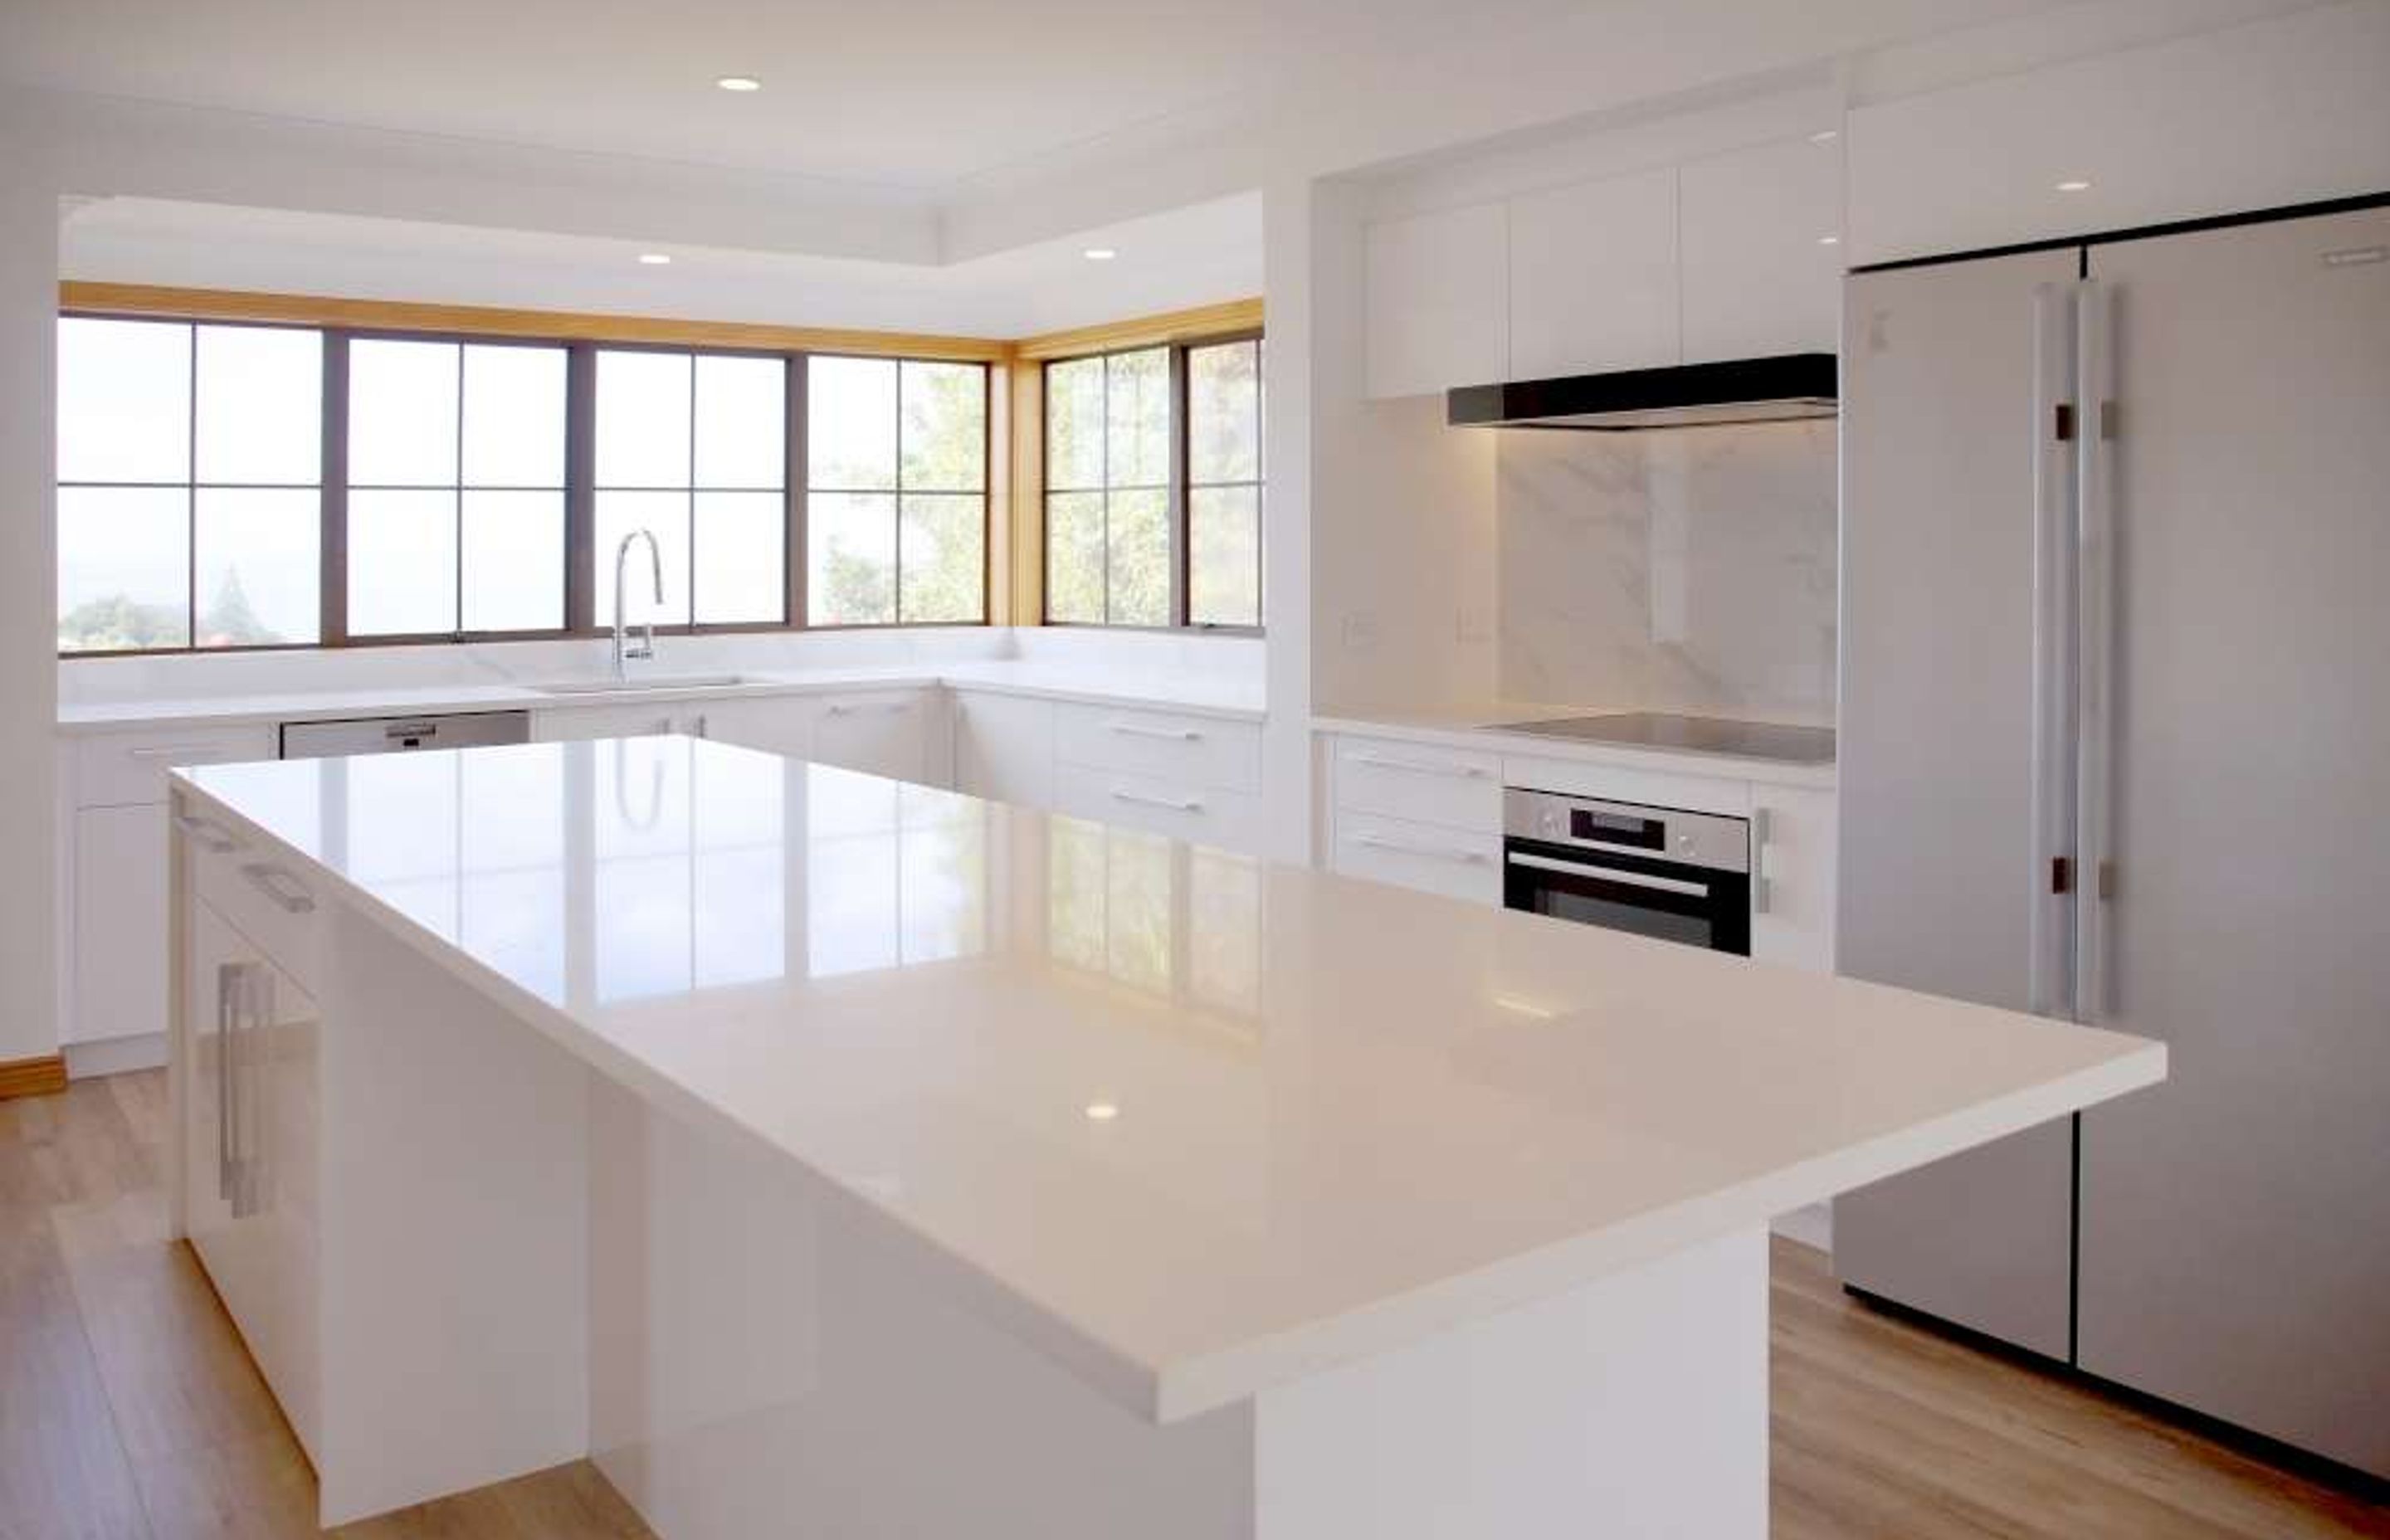 Kitchen Renovation in Blockhouse Bay - After the kitchen renovation (see full case study by clicking on the picture)